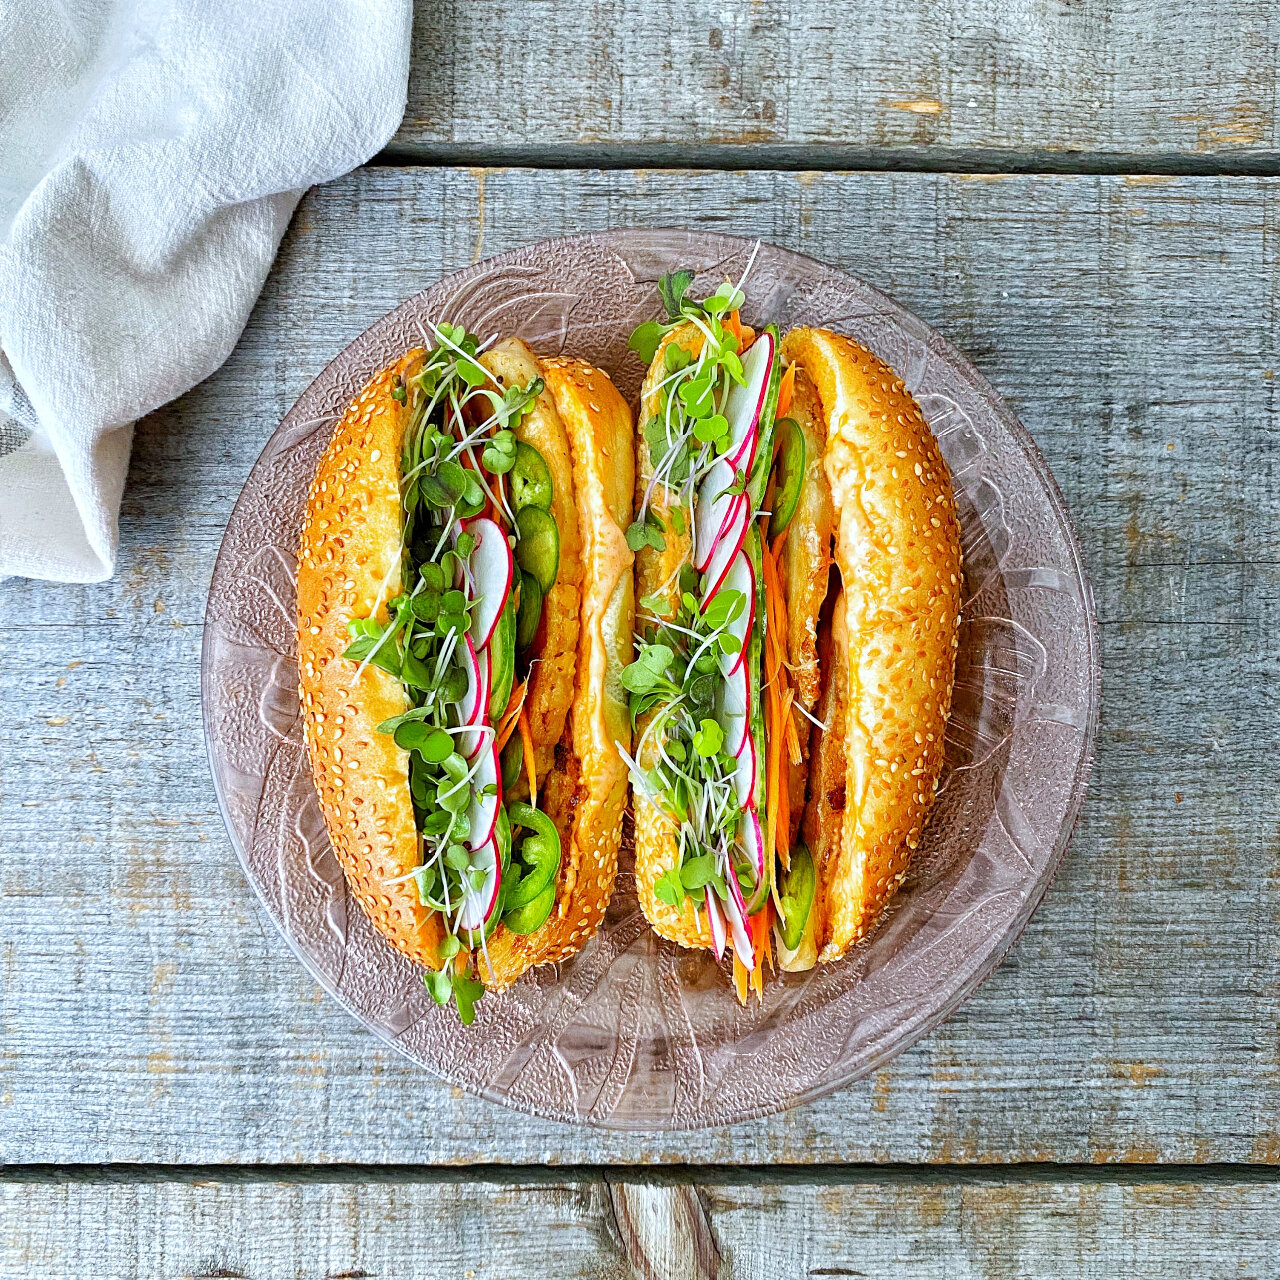 Hot Dogs prepared with Good Leaf Micro Greens